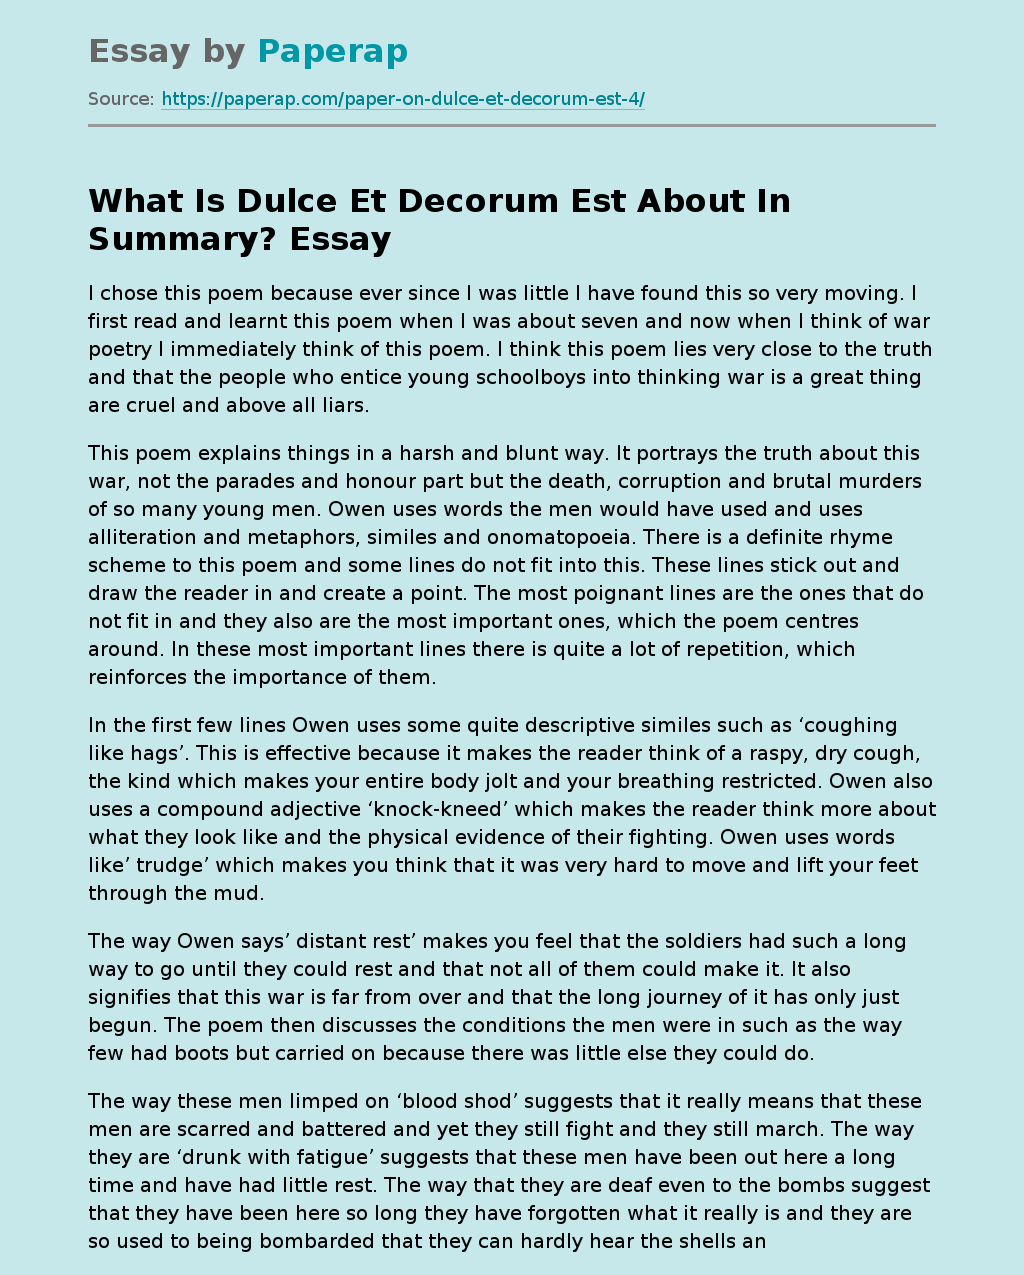 What Is Dulce Et Decorum Est About In Summary?